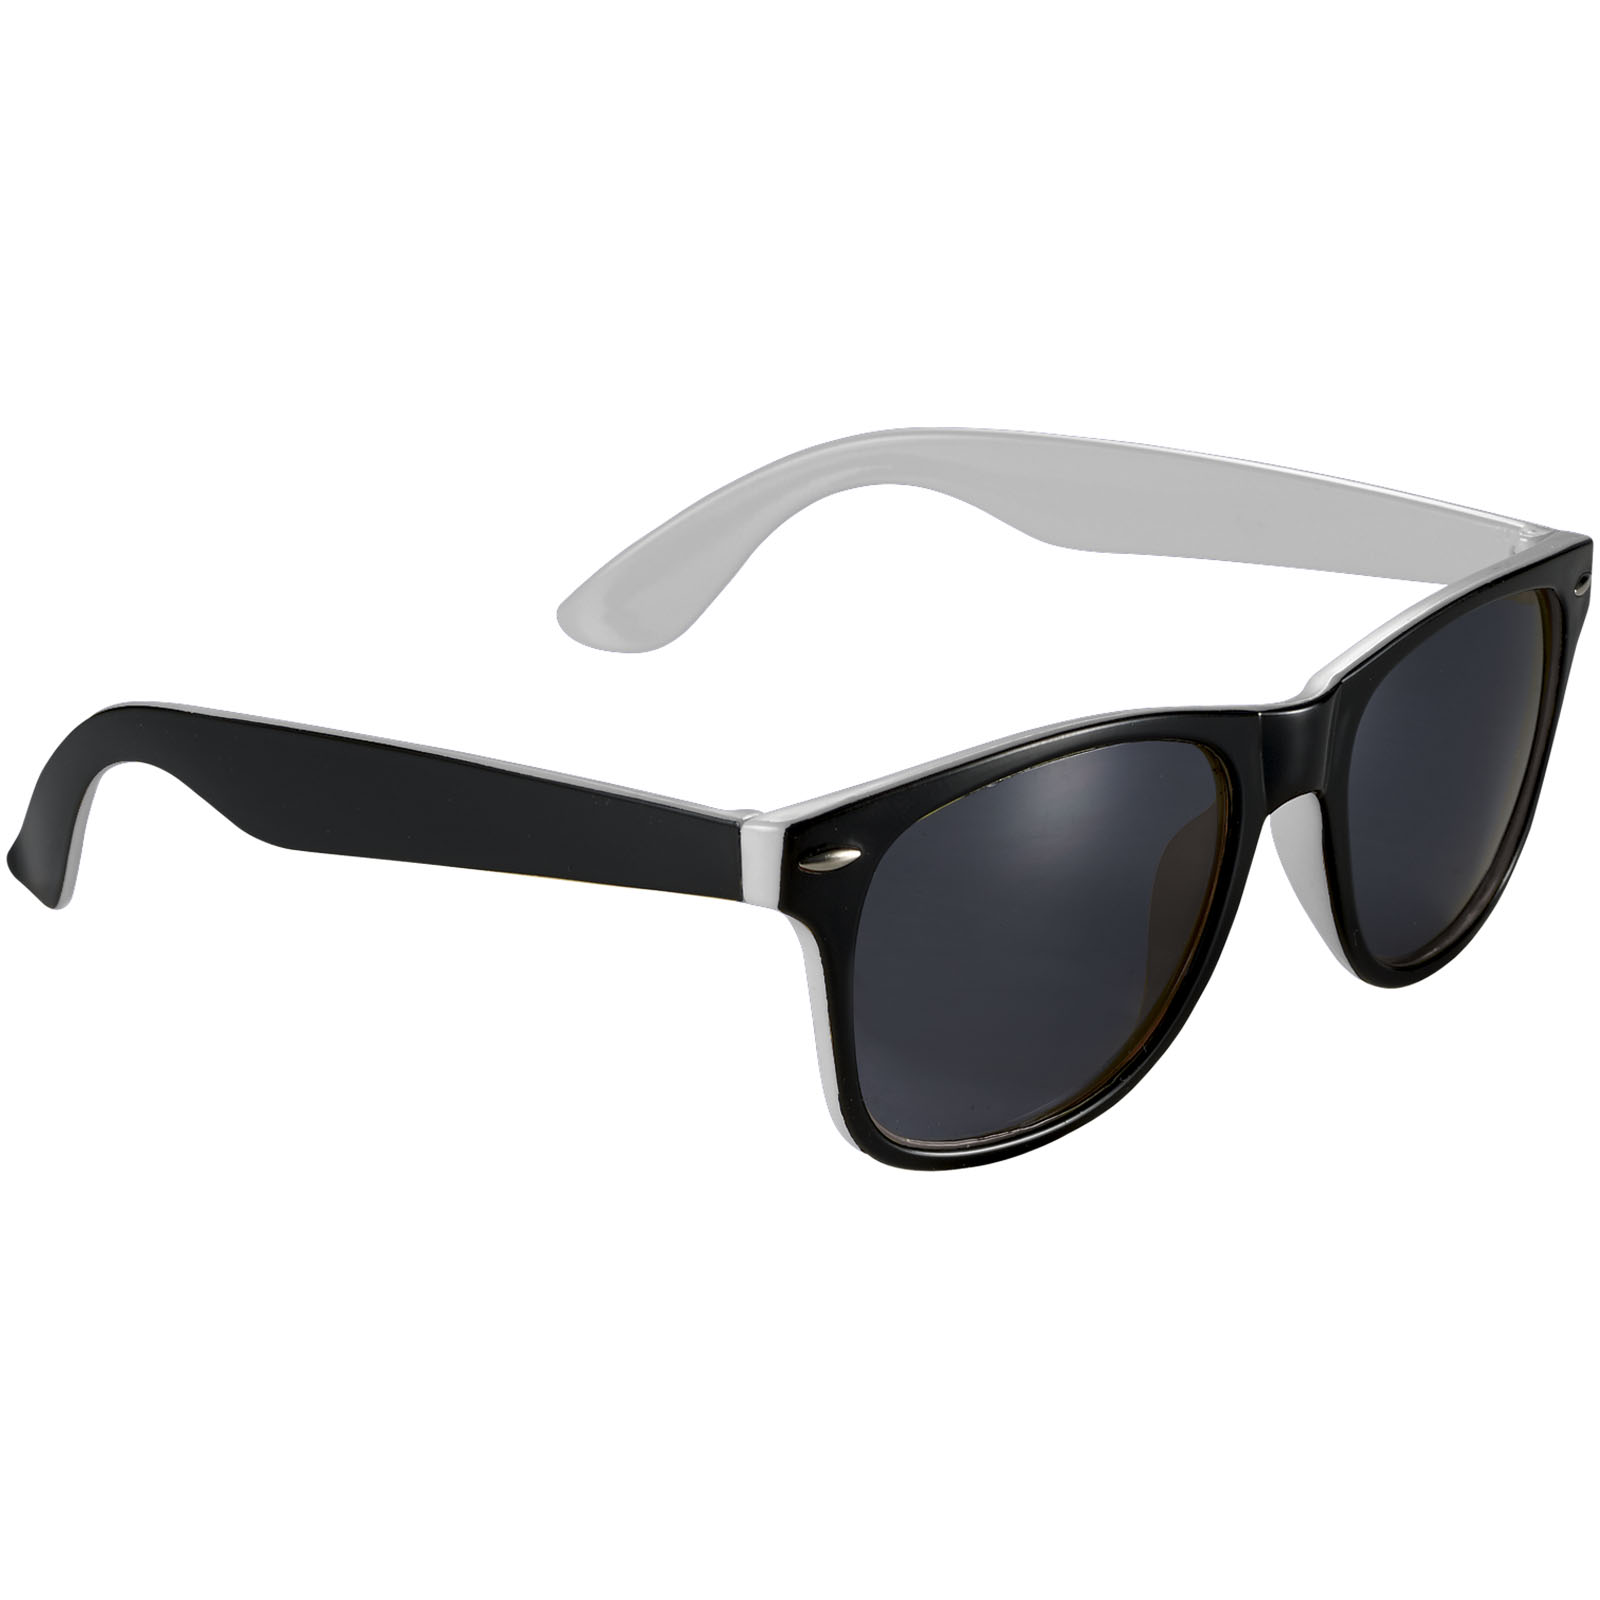 Advertising Sunglasses - Sun Ray sunglasses with two coloured tones - 2